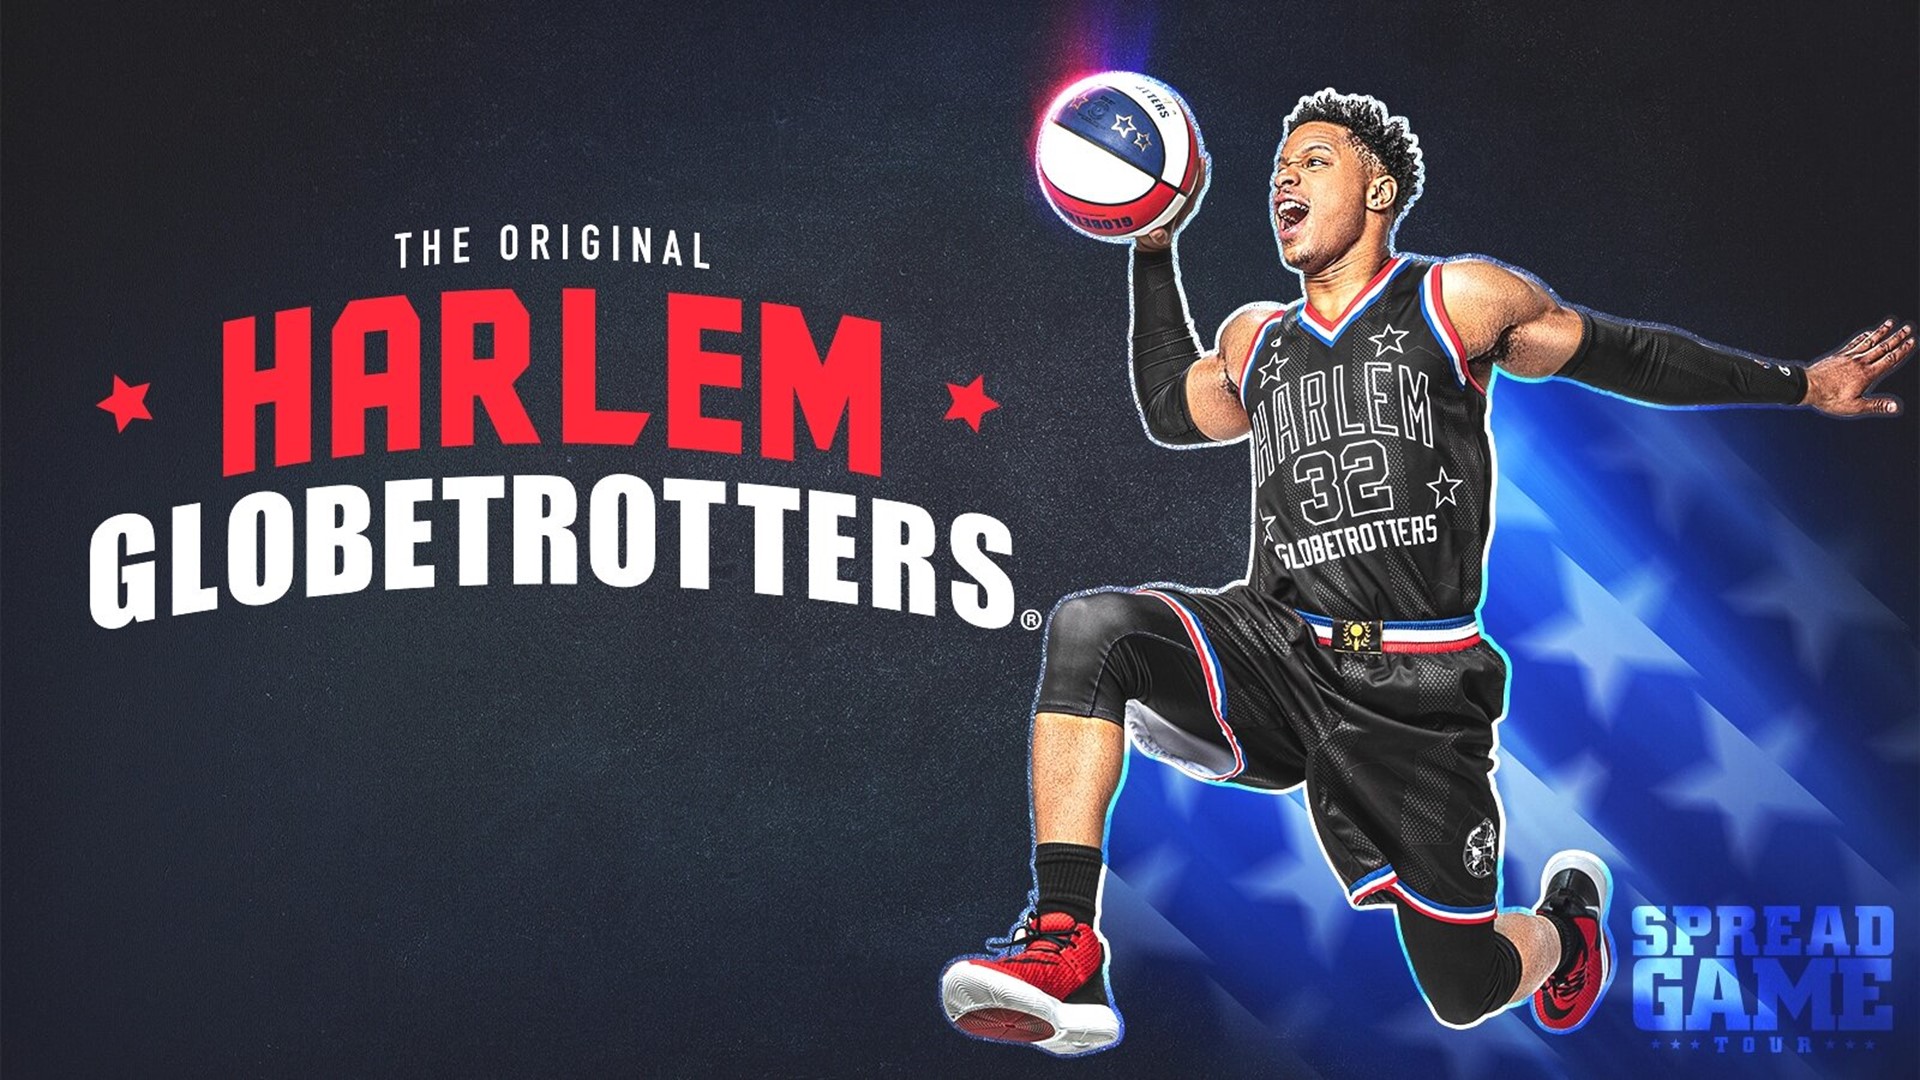 Their tribute 'Spread Game Tour' honors Curly Neal and comes to Kent, Everett, and Seattle next weekend. Sponsored by the Harlem Globetrotters.